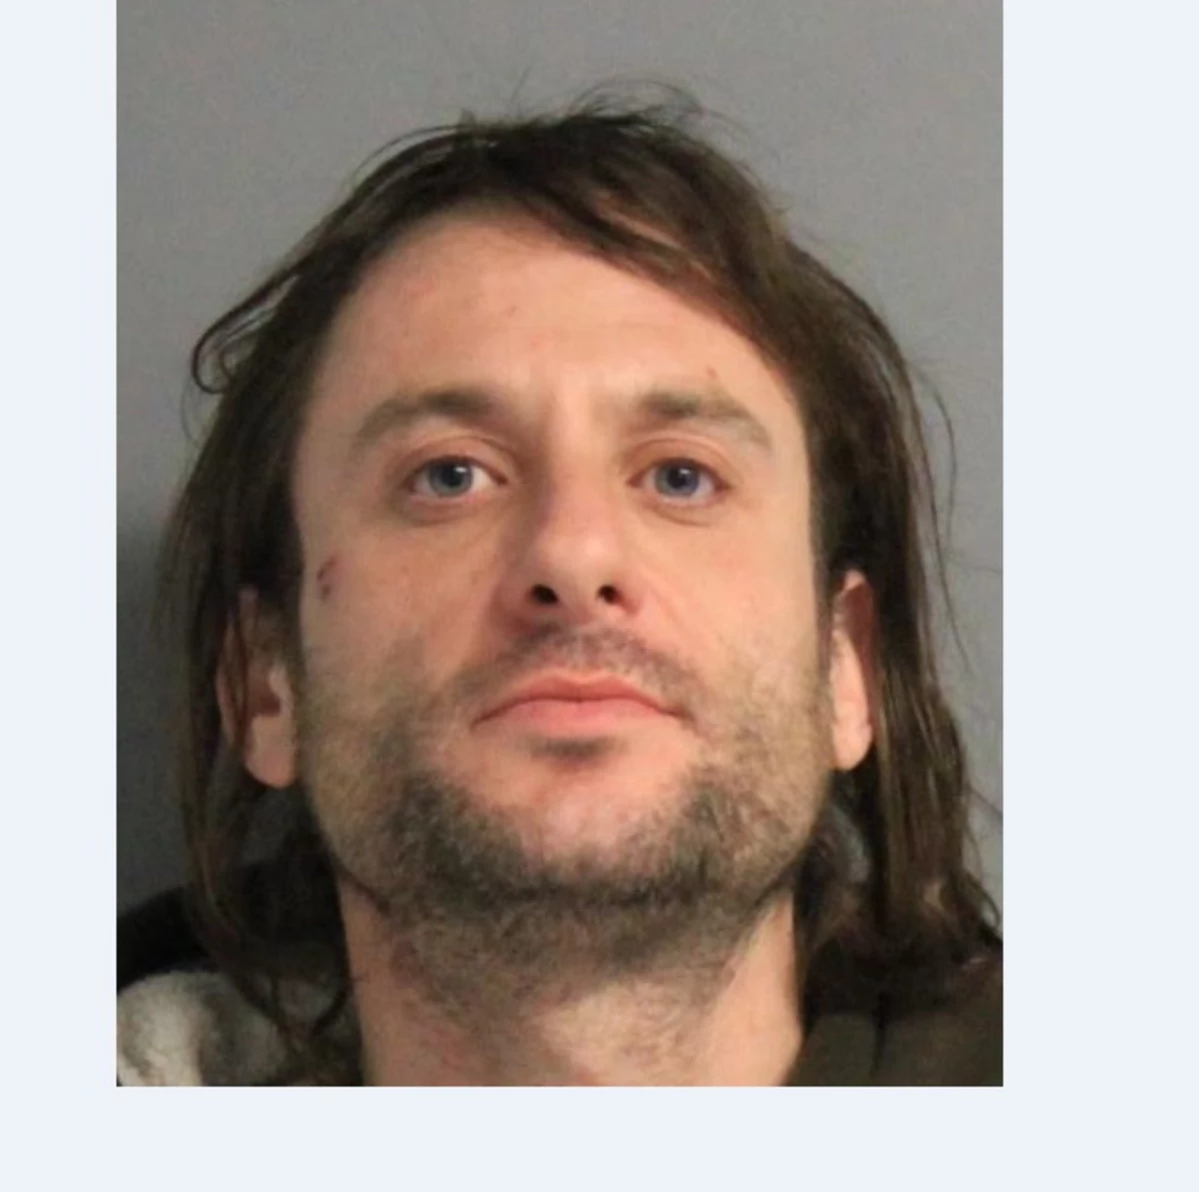 Sullivan County Man Arrested for Stealing TV and Jewelry